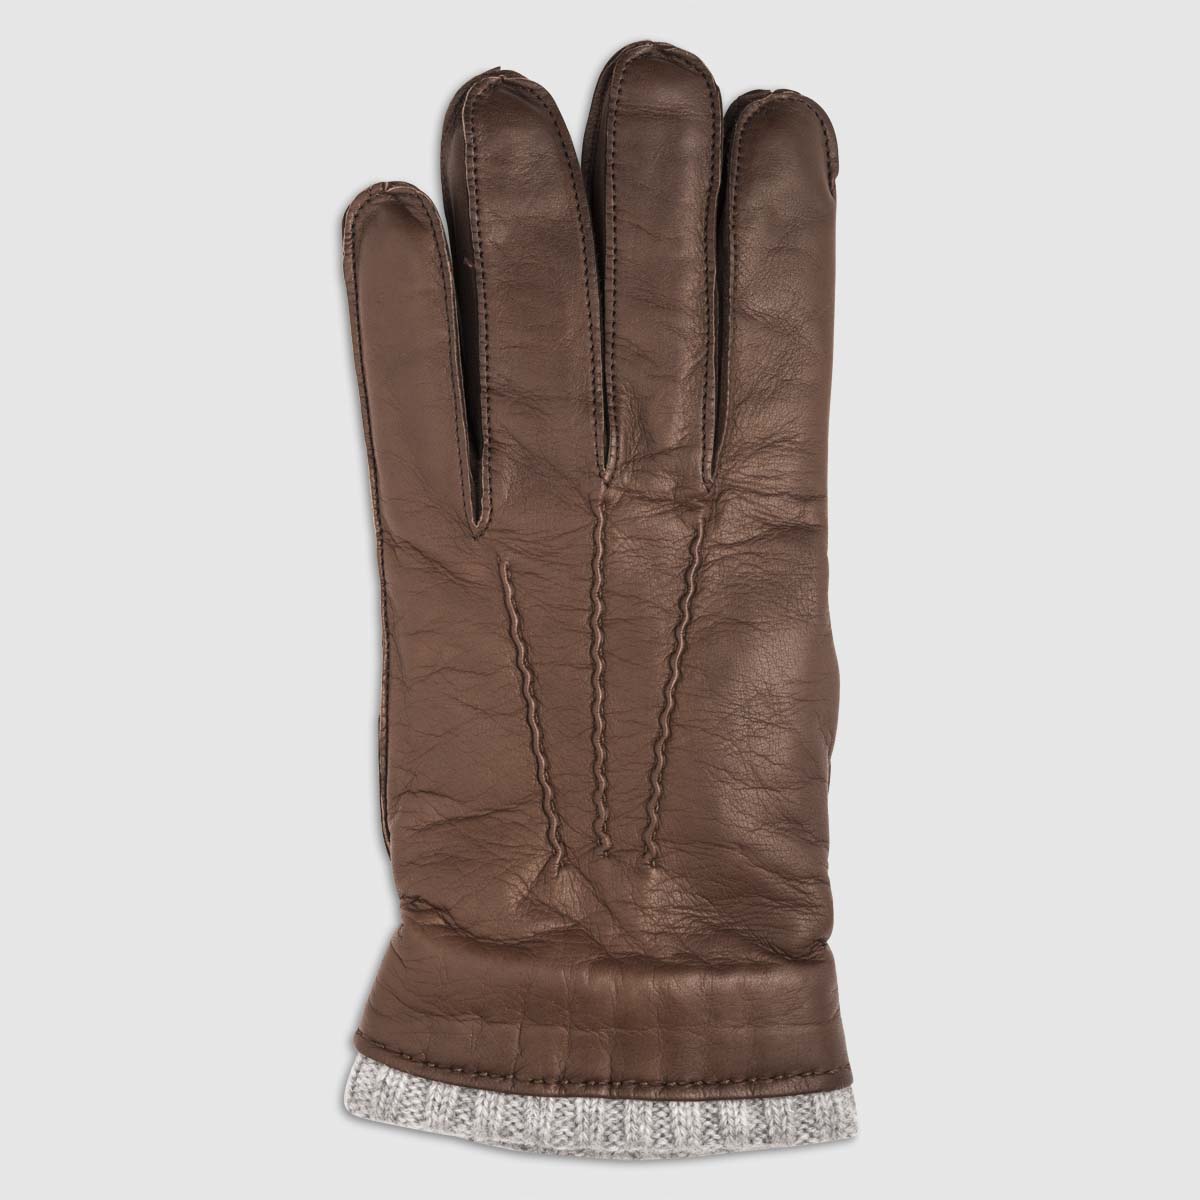 Nappa Leather Glove with Cashmere Lining in Conker – 8